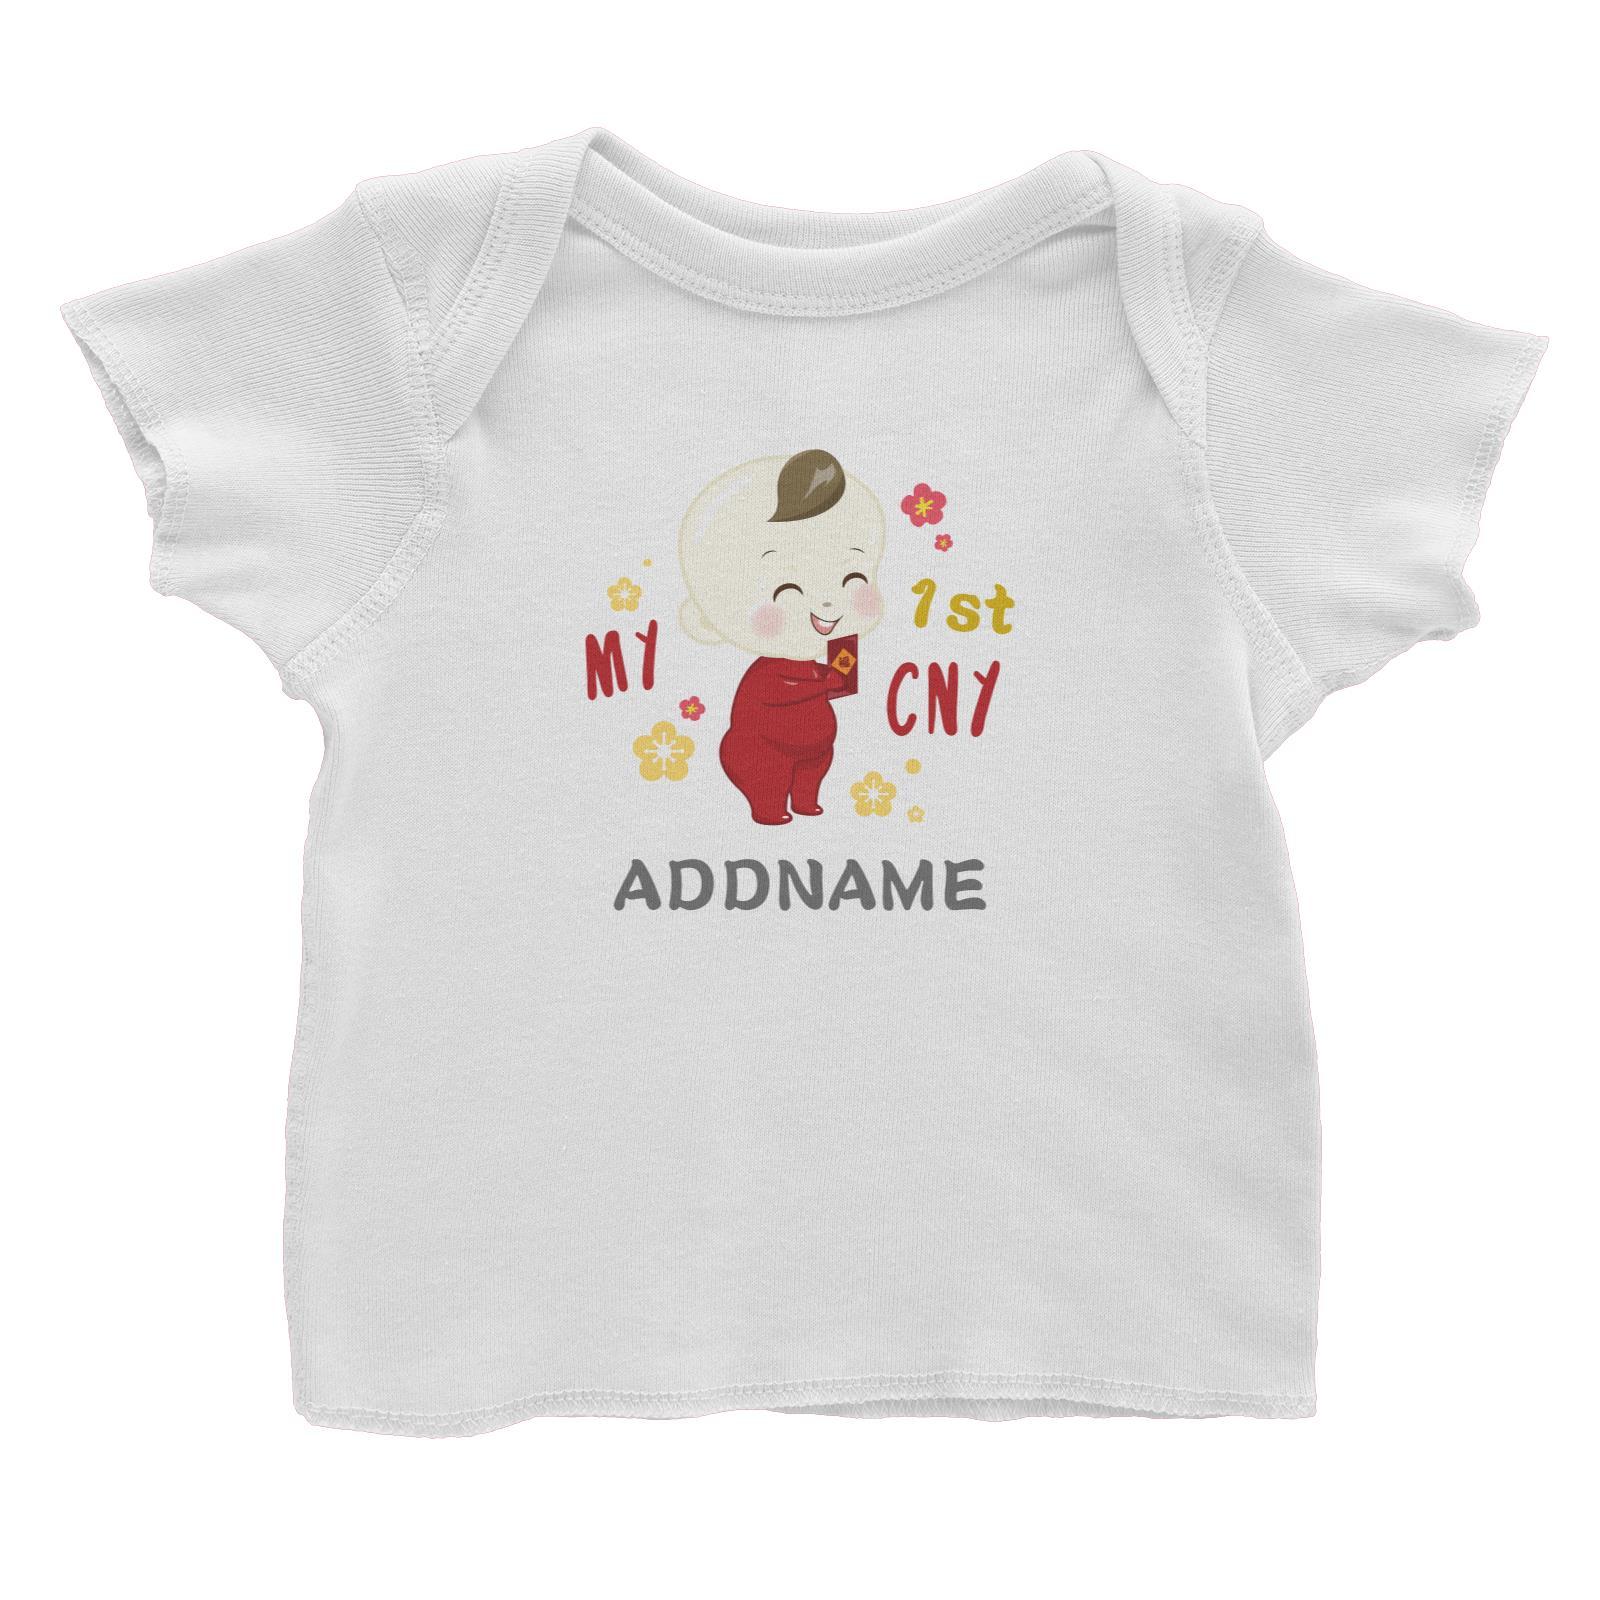 Chinese New Year Family My 1st CNY Baby Boy Addname Baby T-Shirt